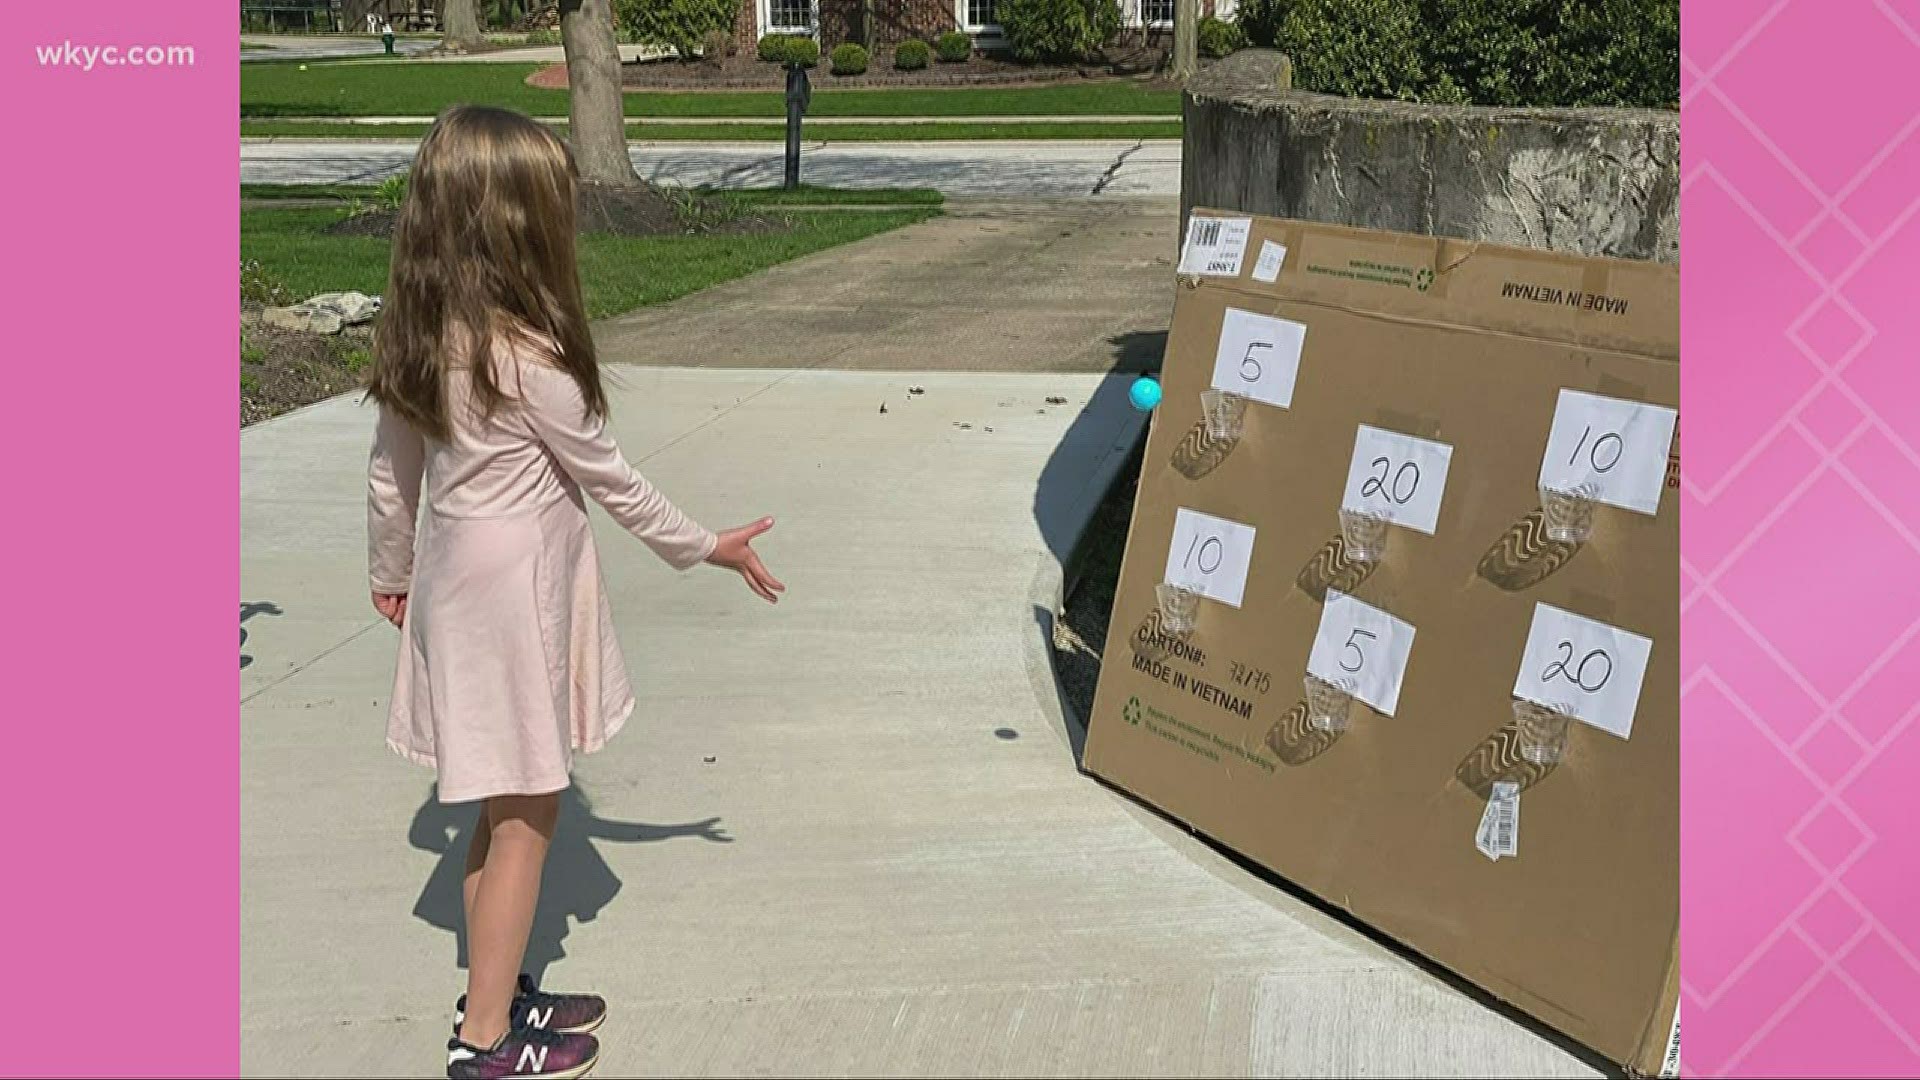 Sometimes kids need a familiar game, but in a new way. See how Maureen Kyle makes an easy ball toss game out of a box and some cups. Read more at wkyc.com/MomSquad.